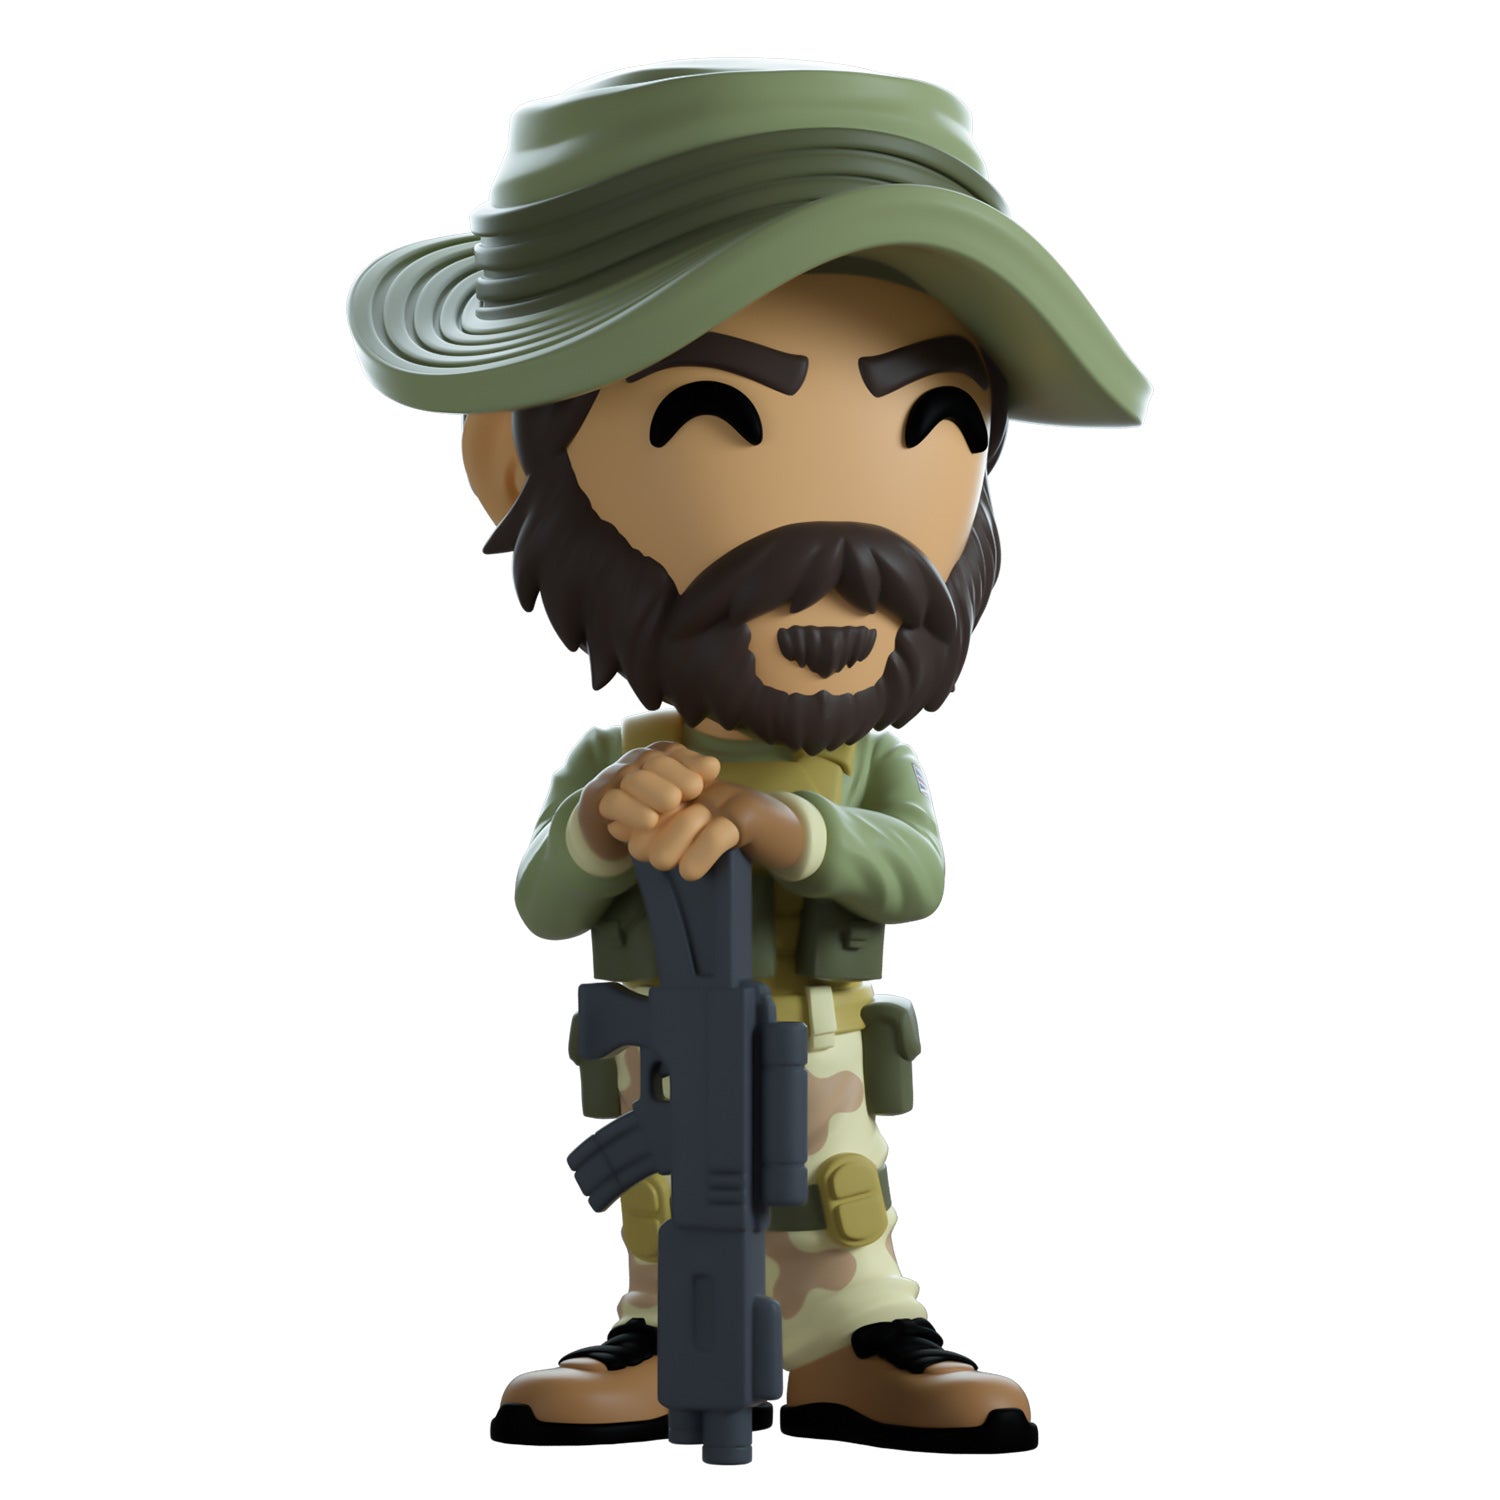 Call of Duty Captain Price Youtooz Figurine - Front Side View